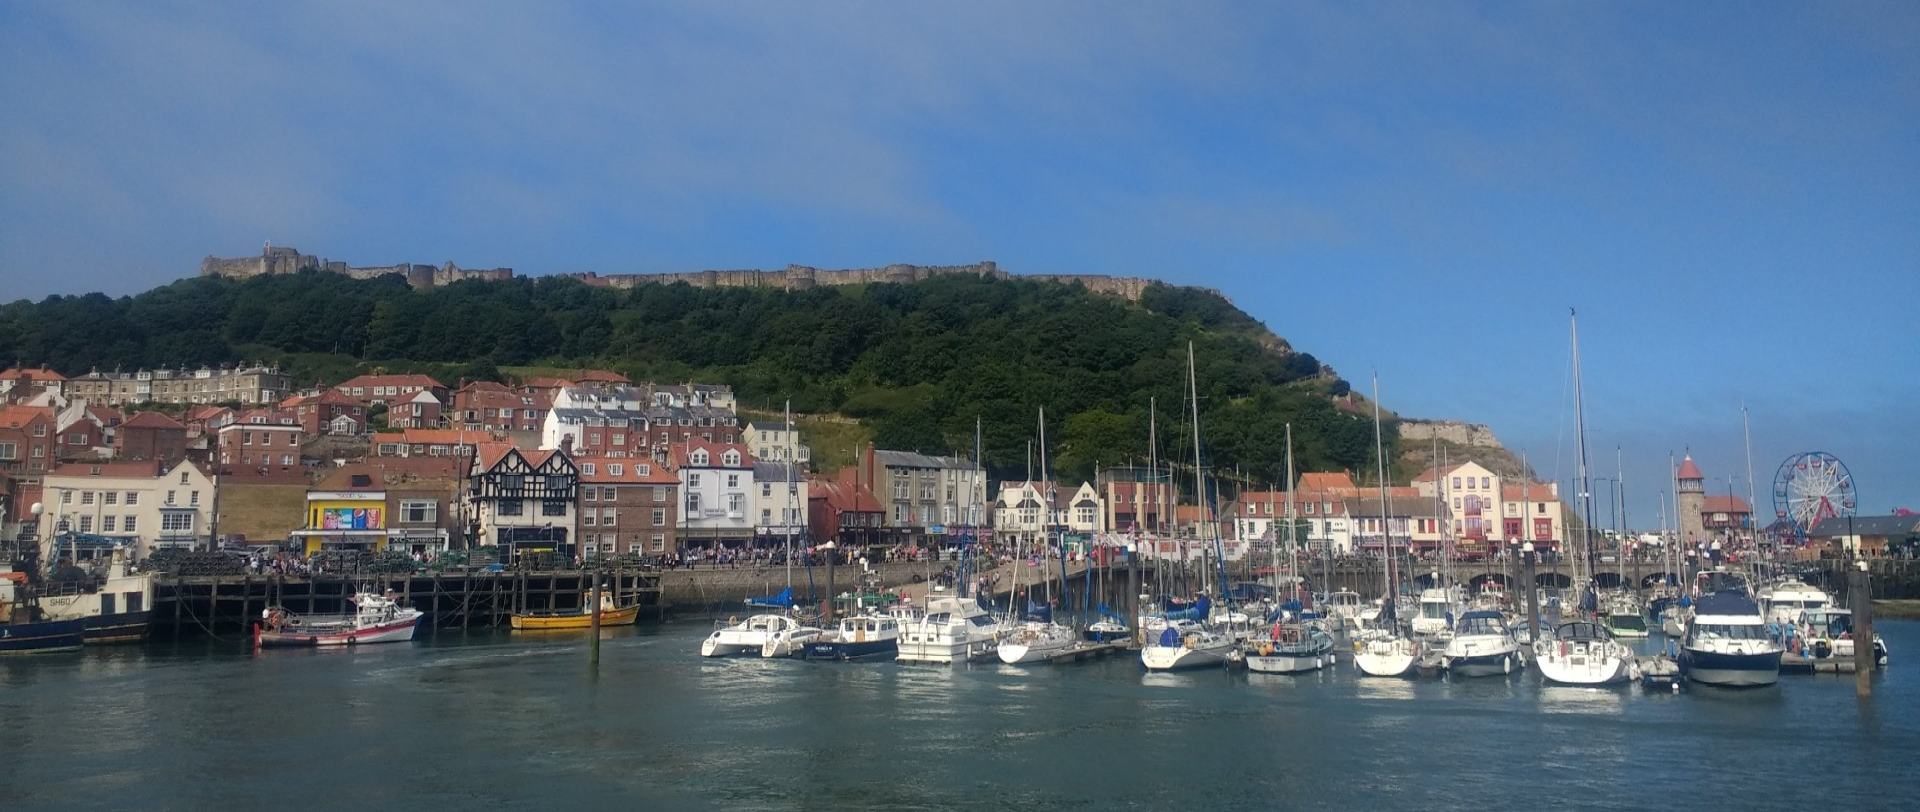 A View Of Scarborough From The South Bay